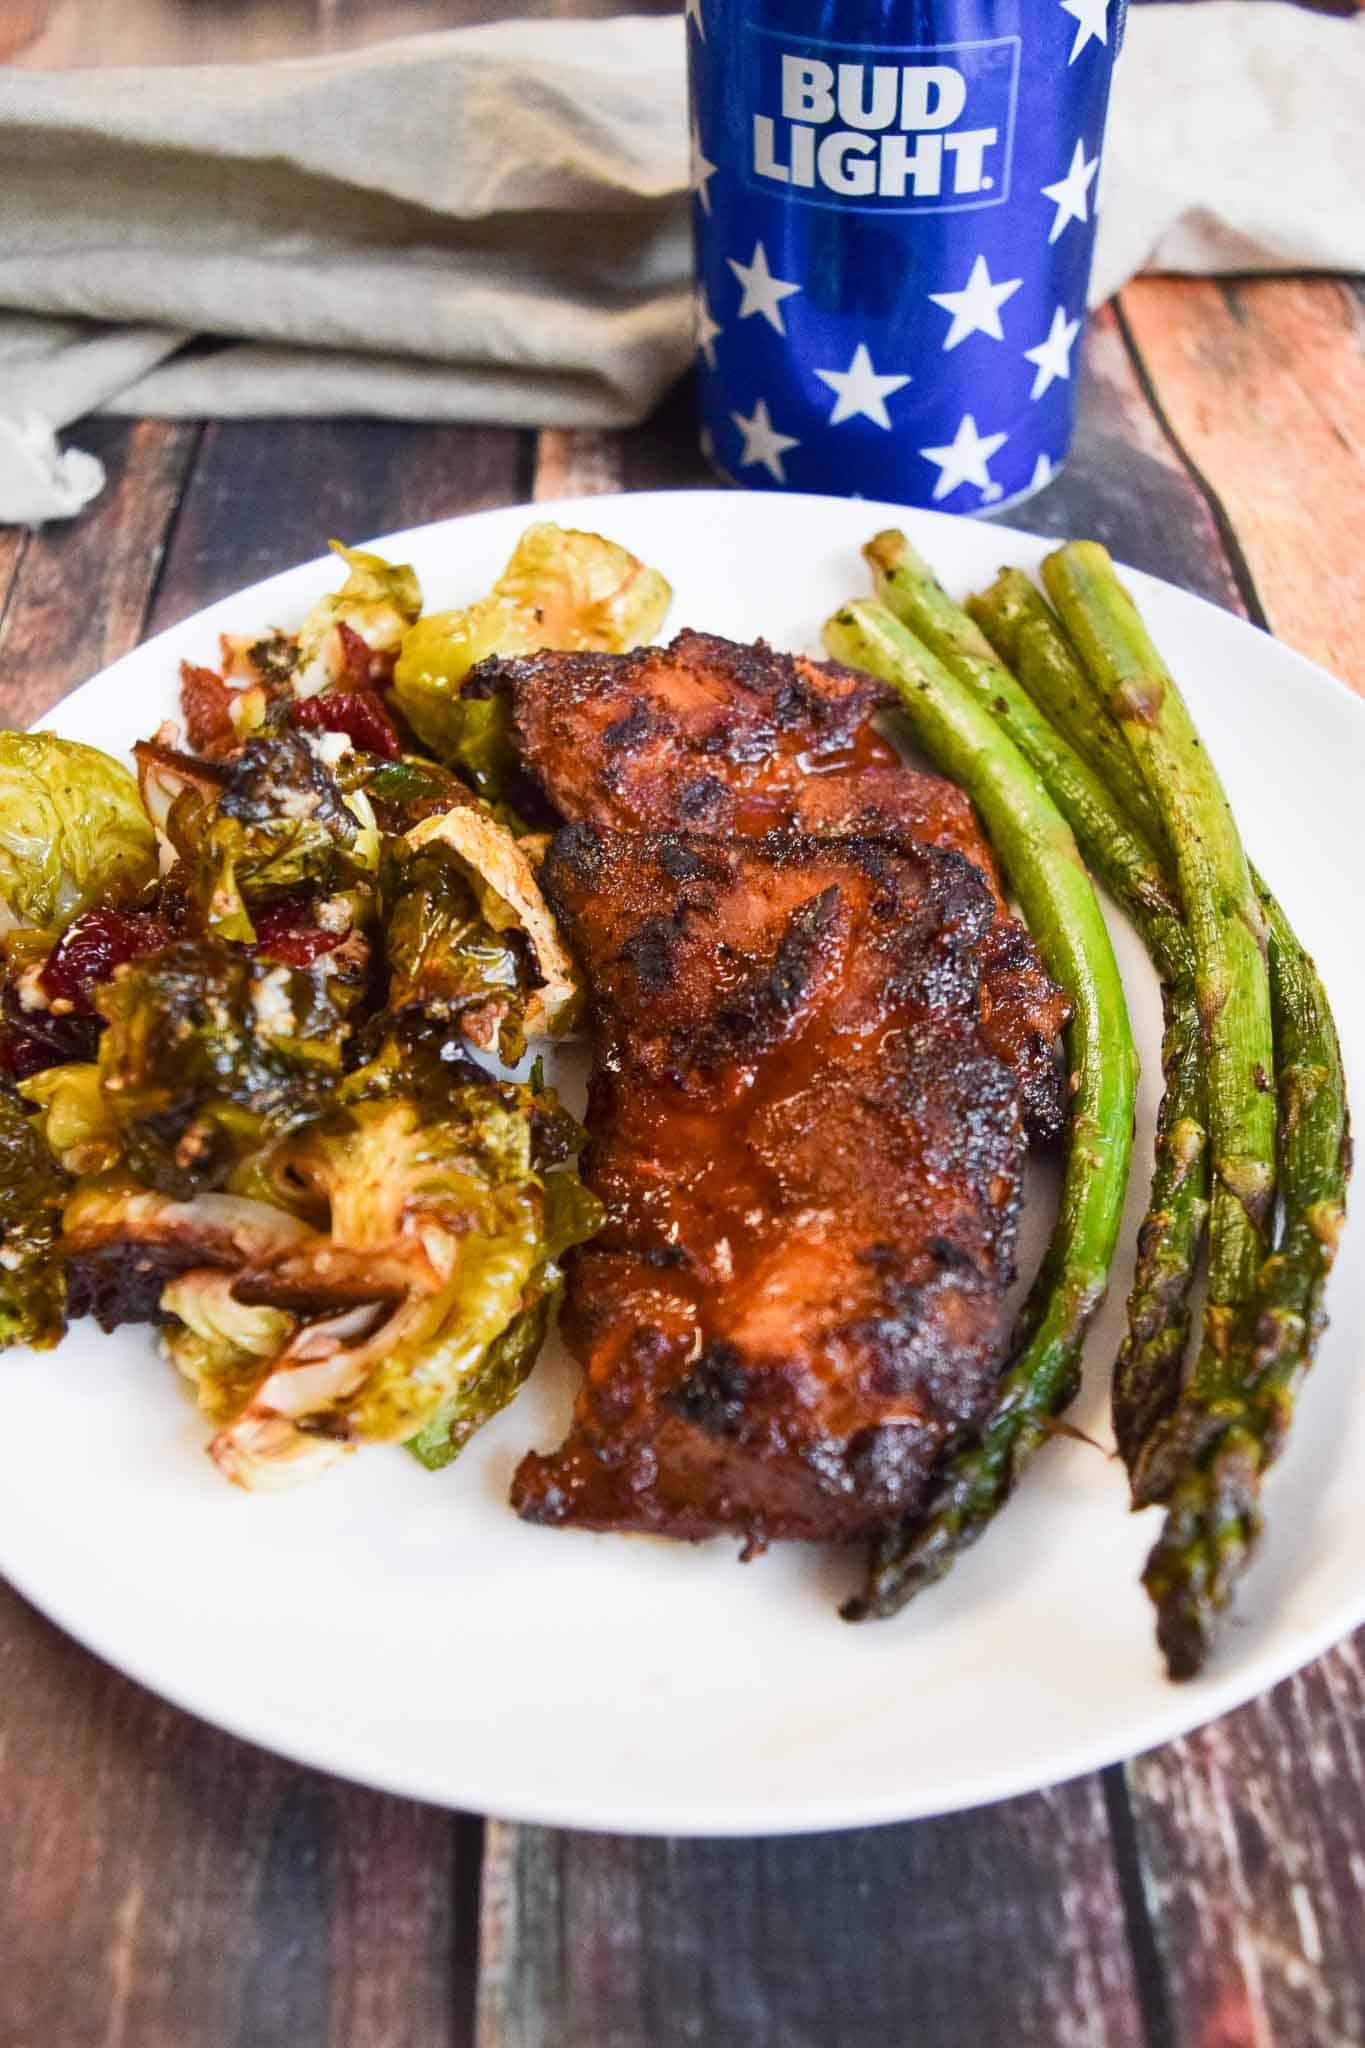 BBQ chicken thighs on plate with asparagus and bud light can in background